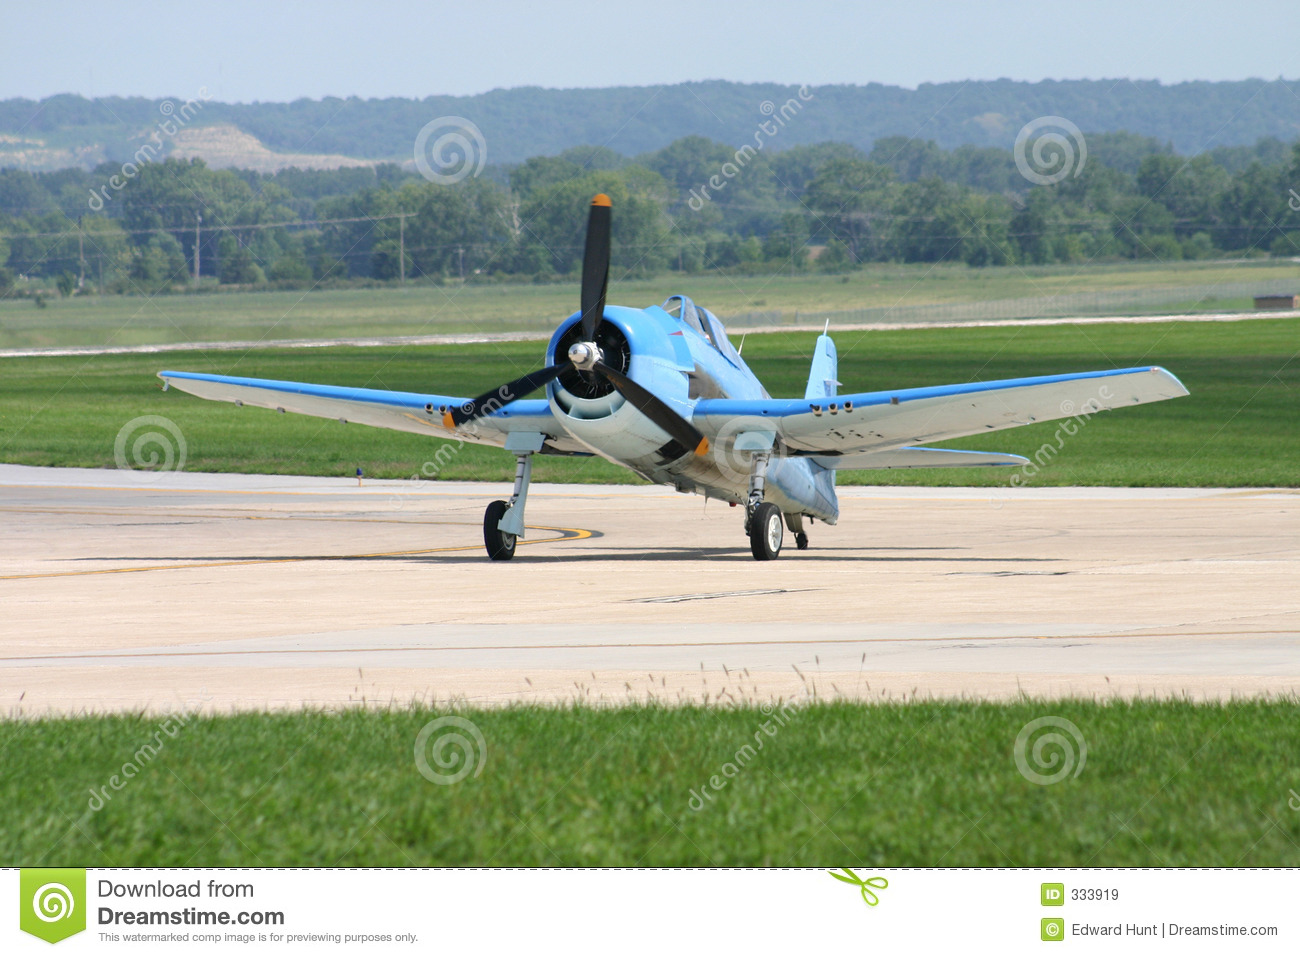 Wwii Air Plane On Runway Royalty Free Stock Images   Image  333919